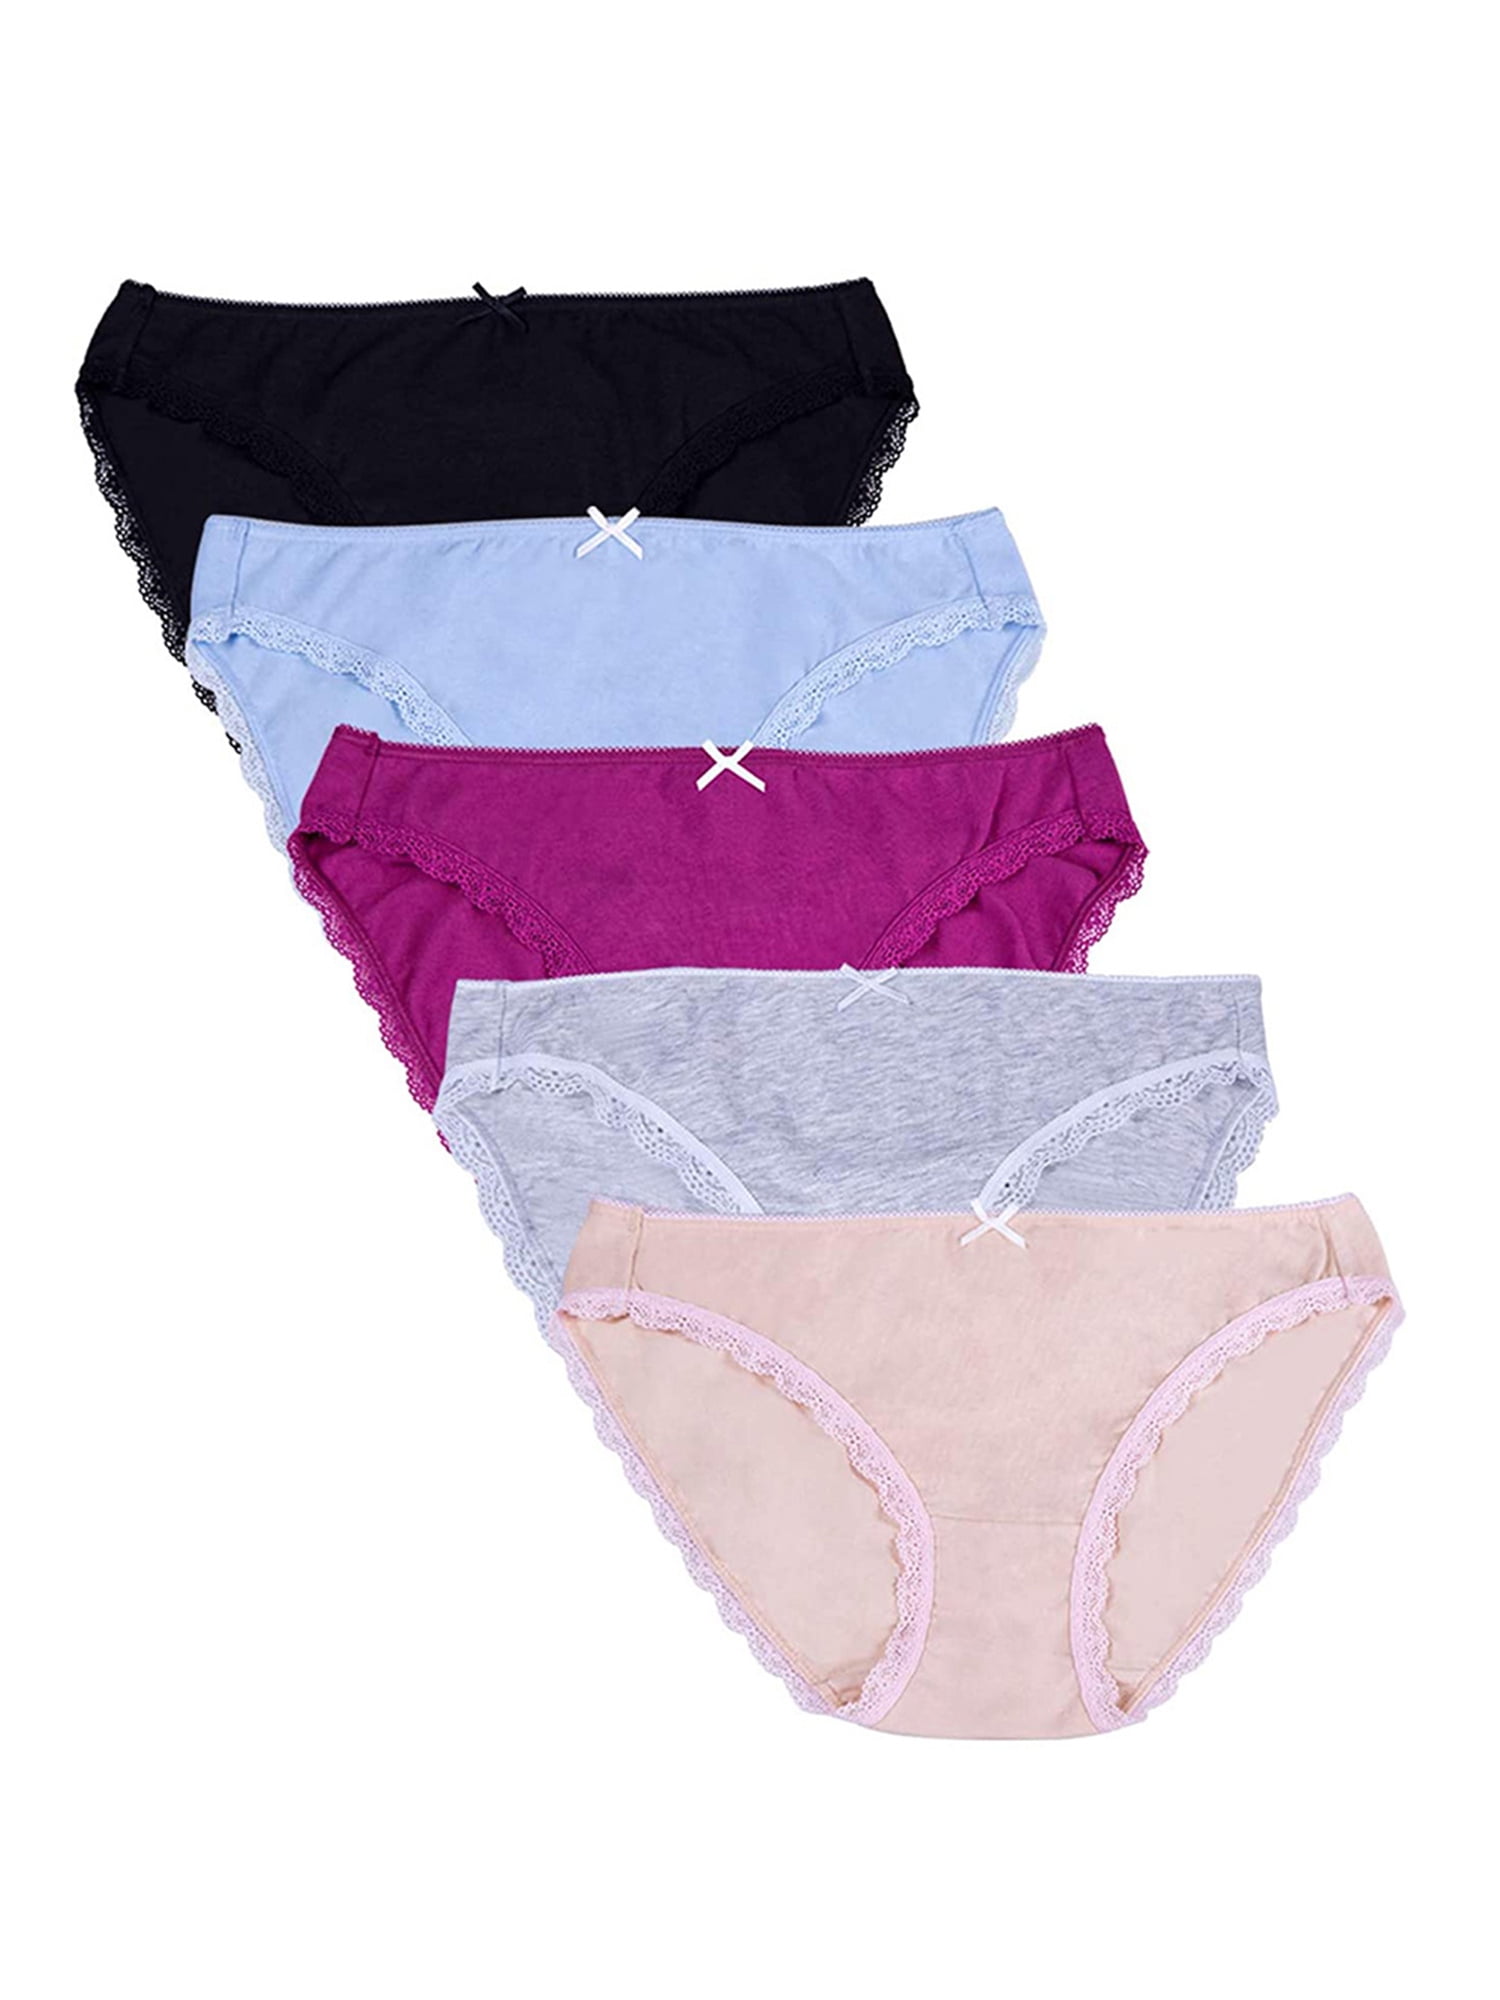 Sociala Women's Cotton High Wiasted Lace Underwear Assorted Cotton Hipster  Panties,5 Pack 